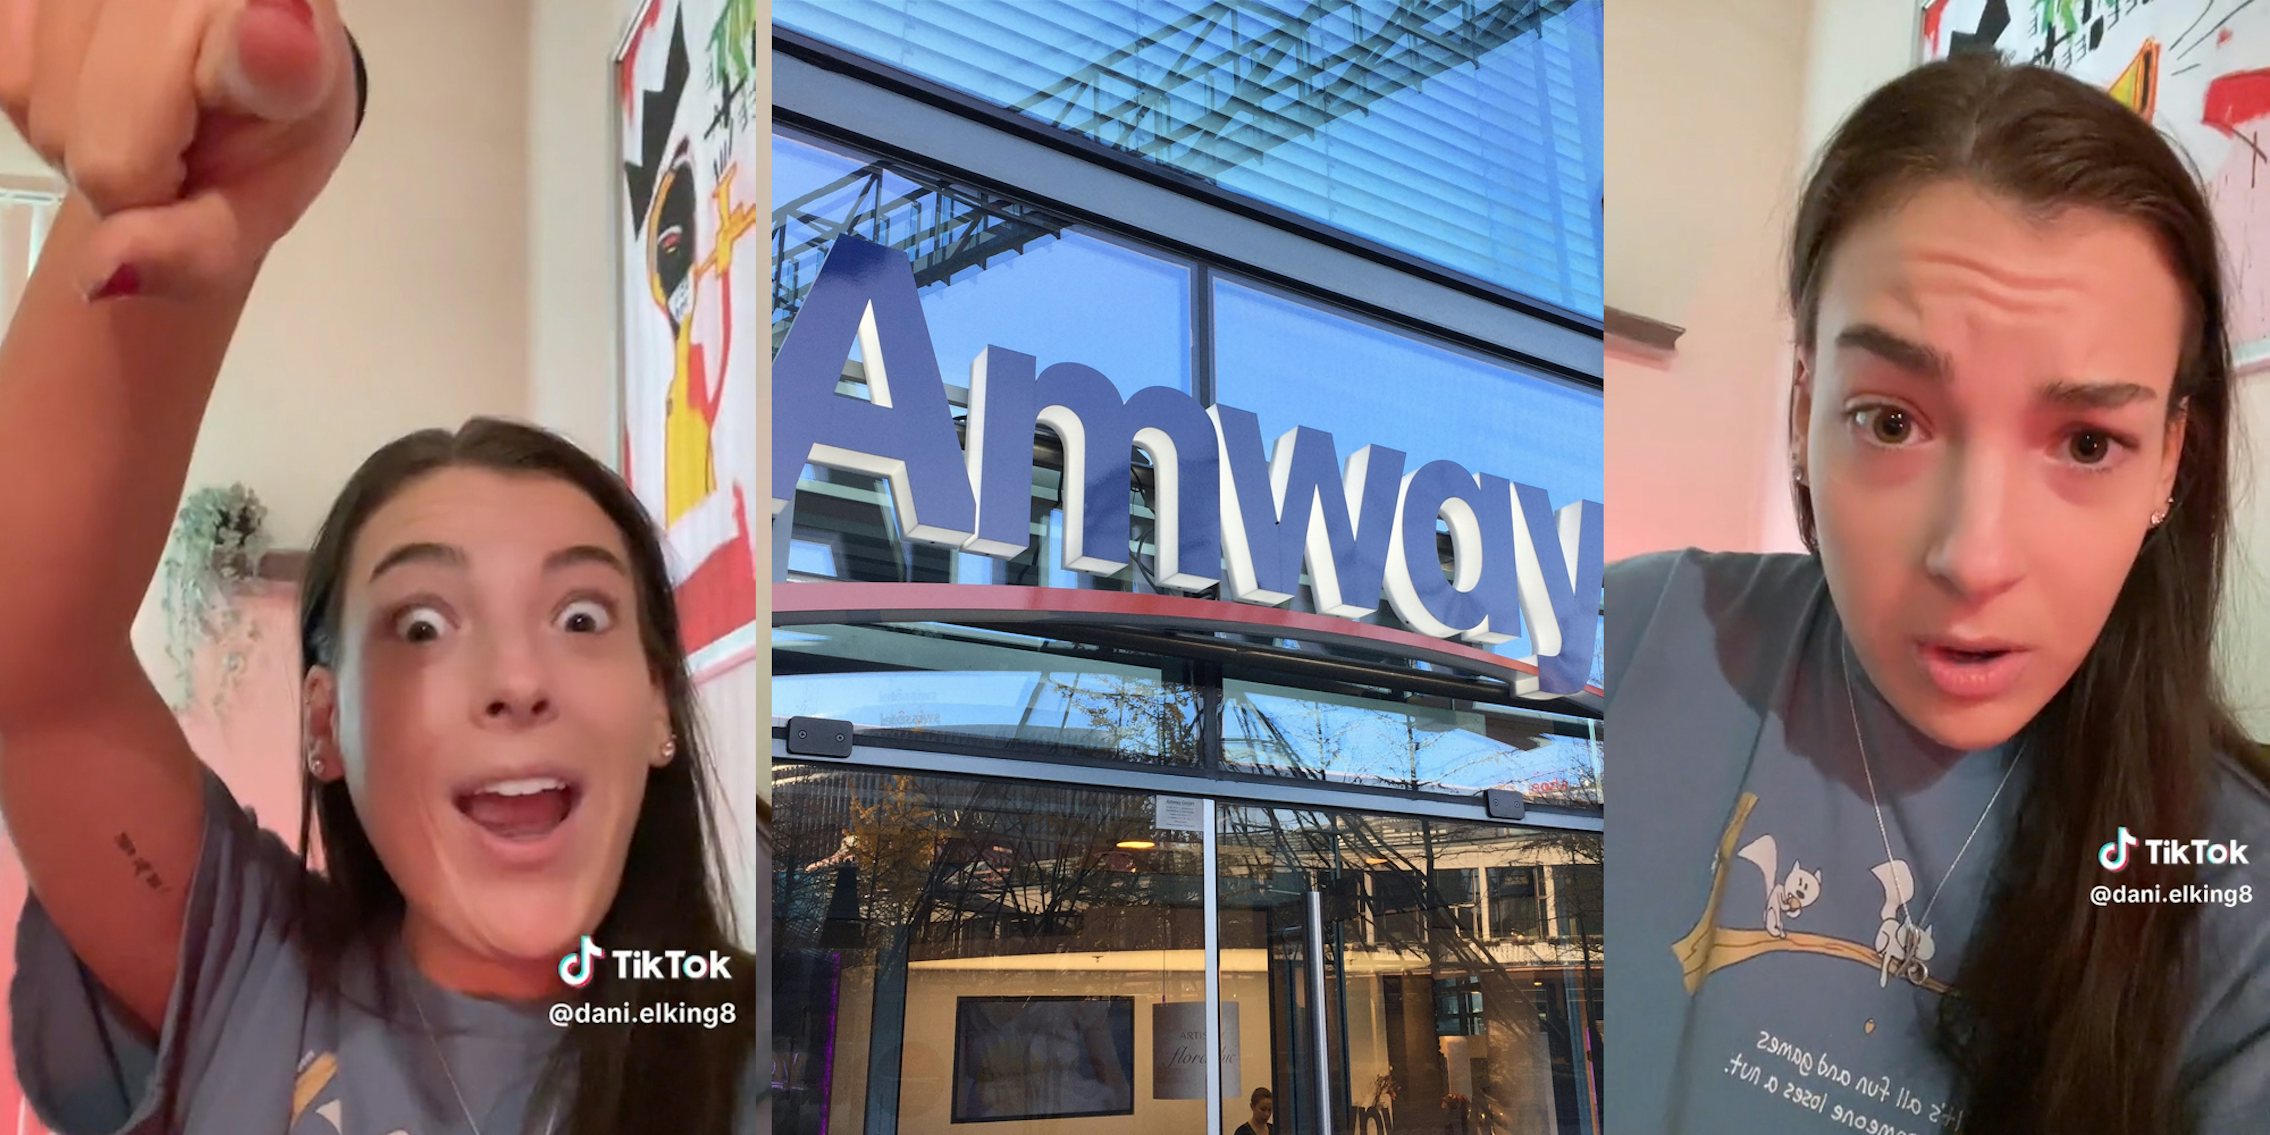 Woman pointing with wide eyes(l), Amyway sign in front of building(c), Same woman looking concerned(r)